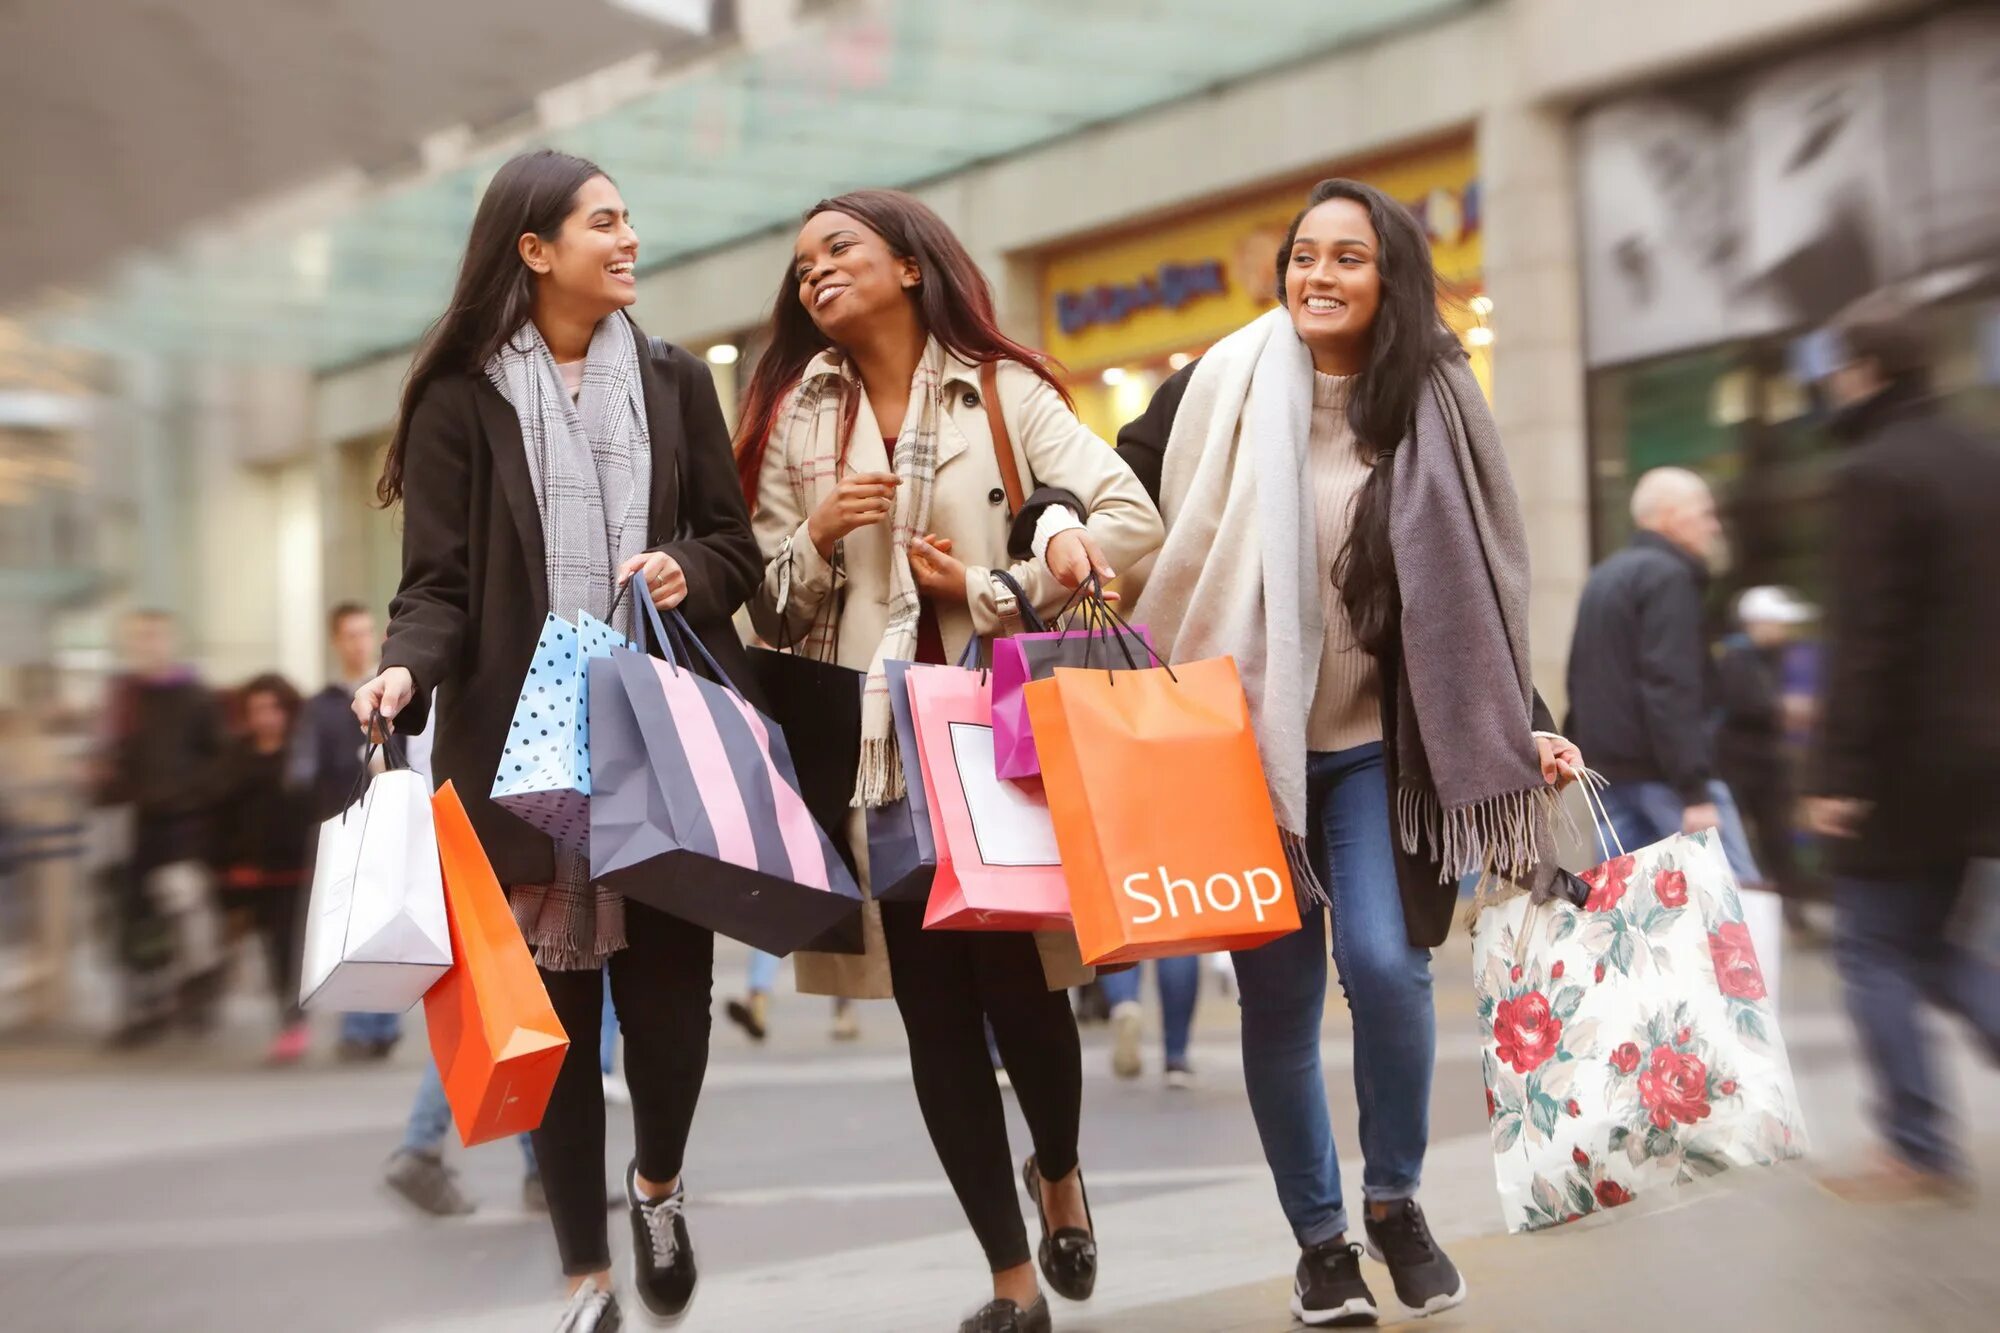 1- She’ll go shopping in Town …. Consumer confidence. Tomorrow we go shopping